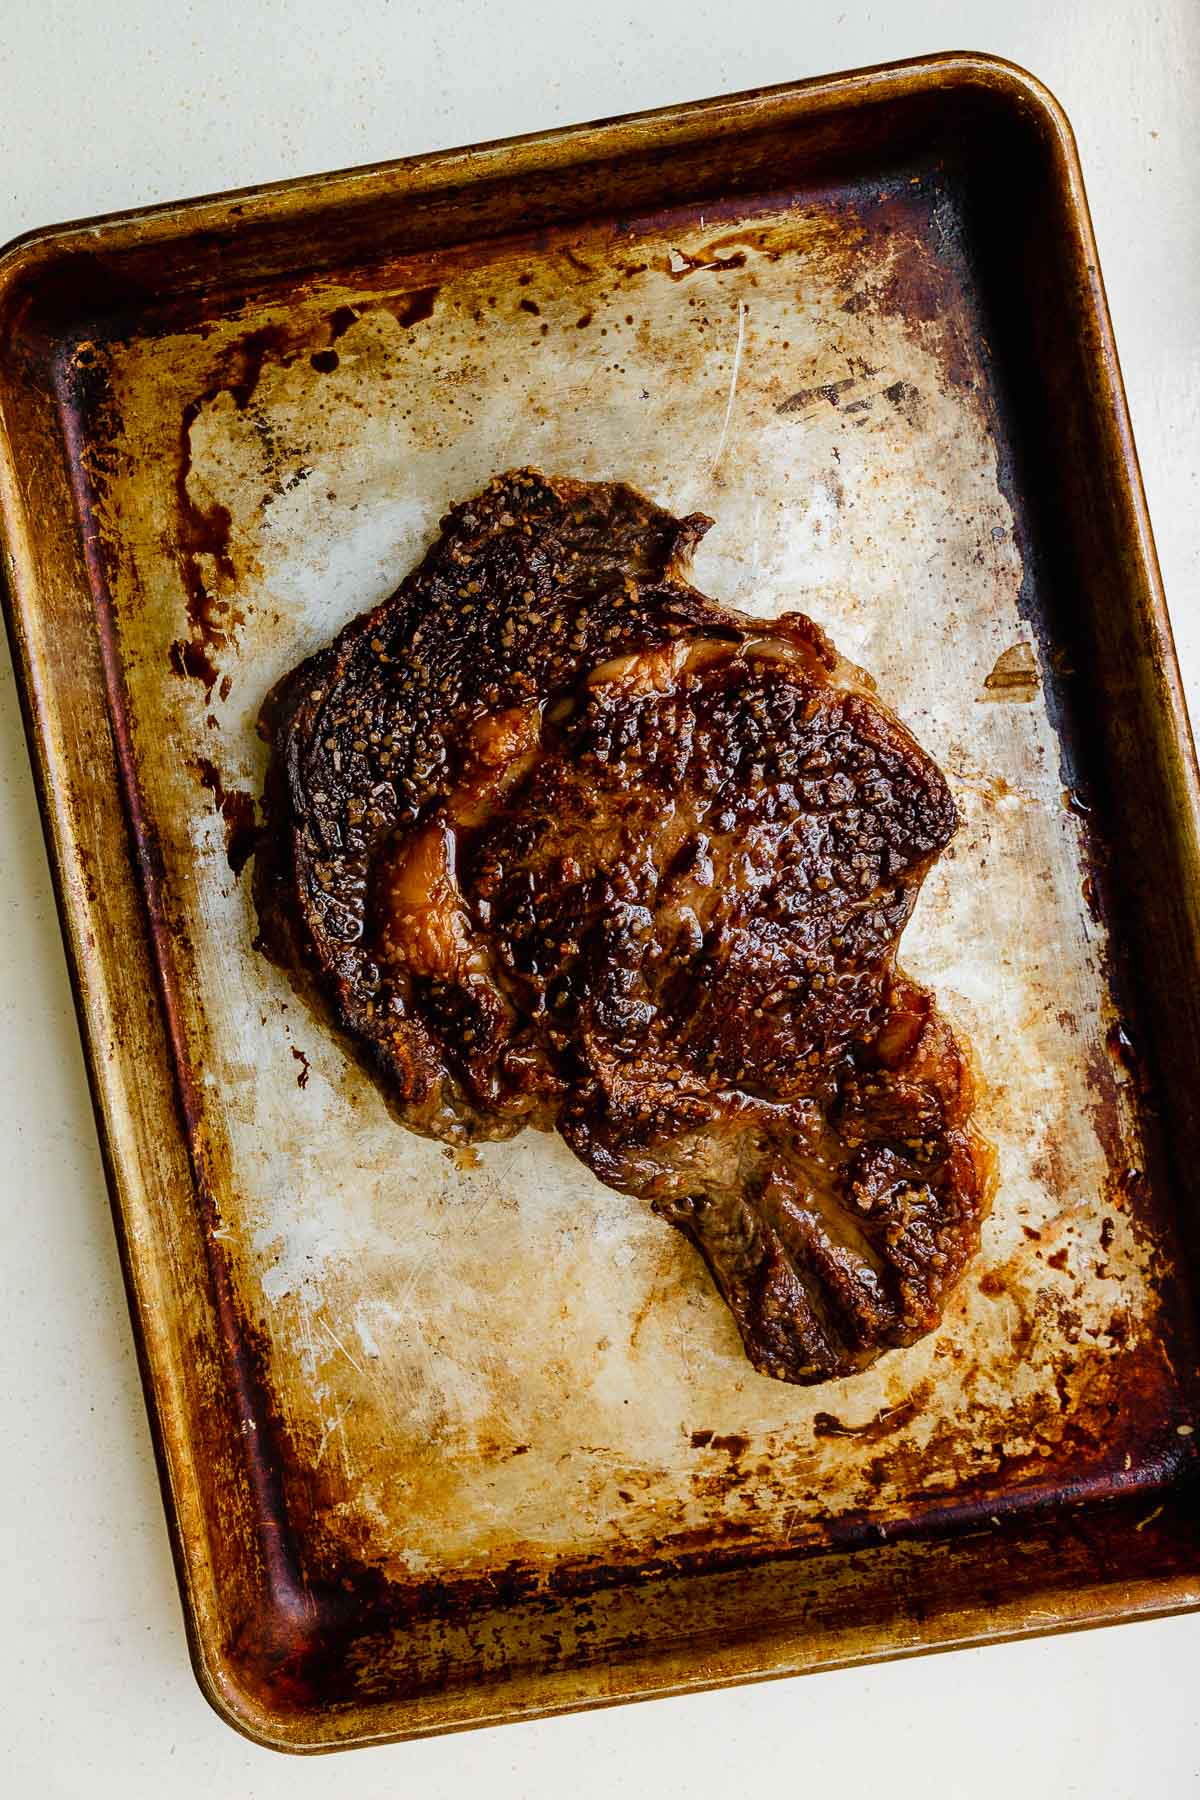 cooked steak on a baking sheet